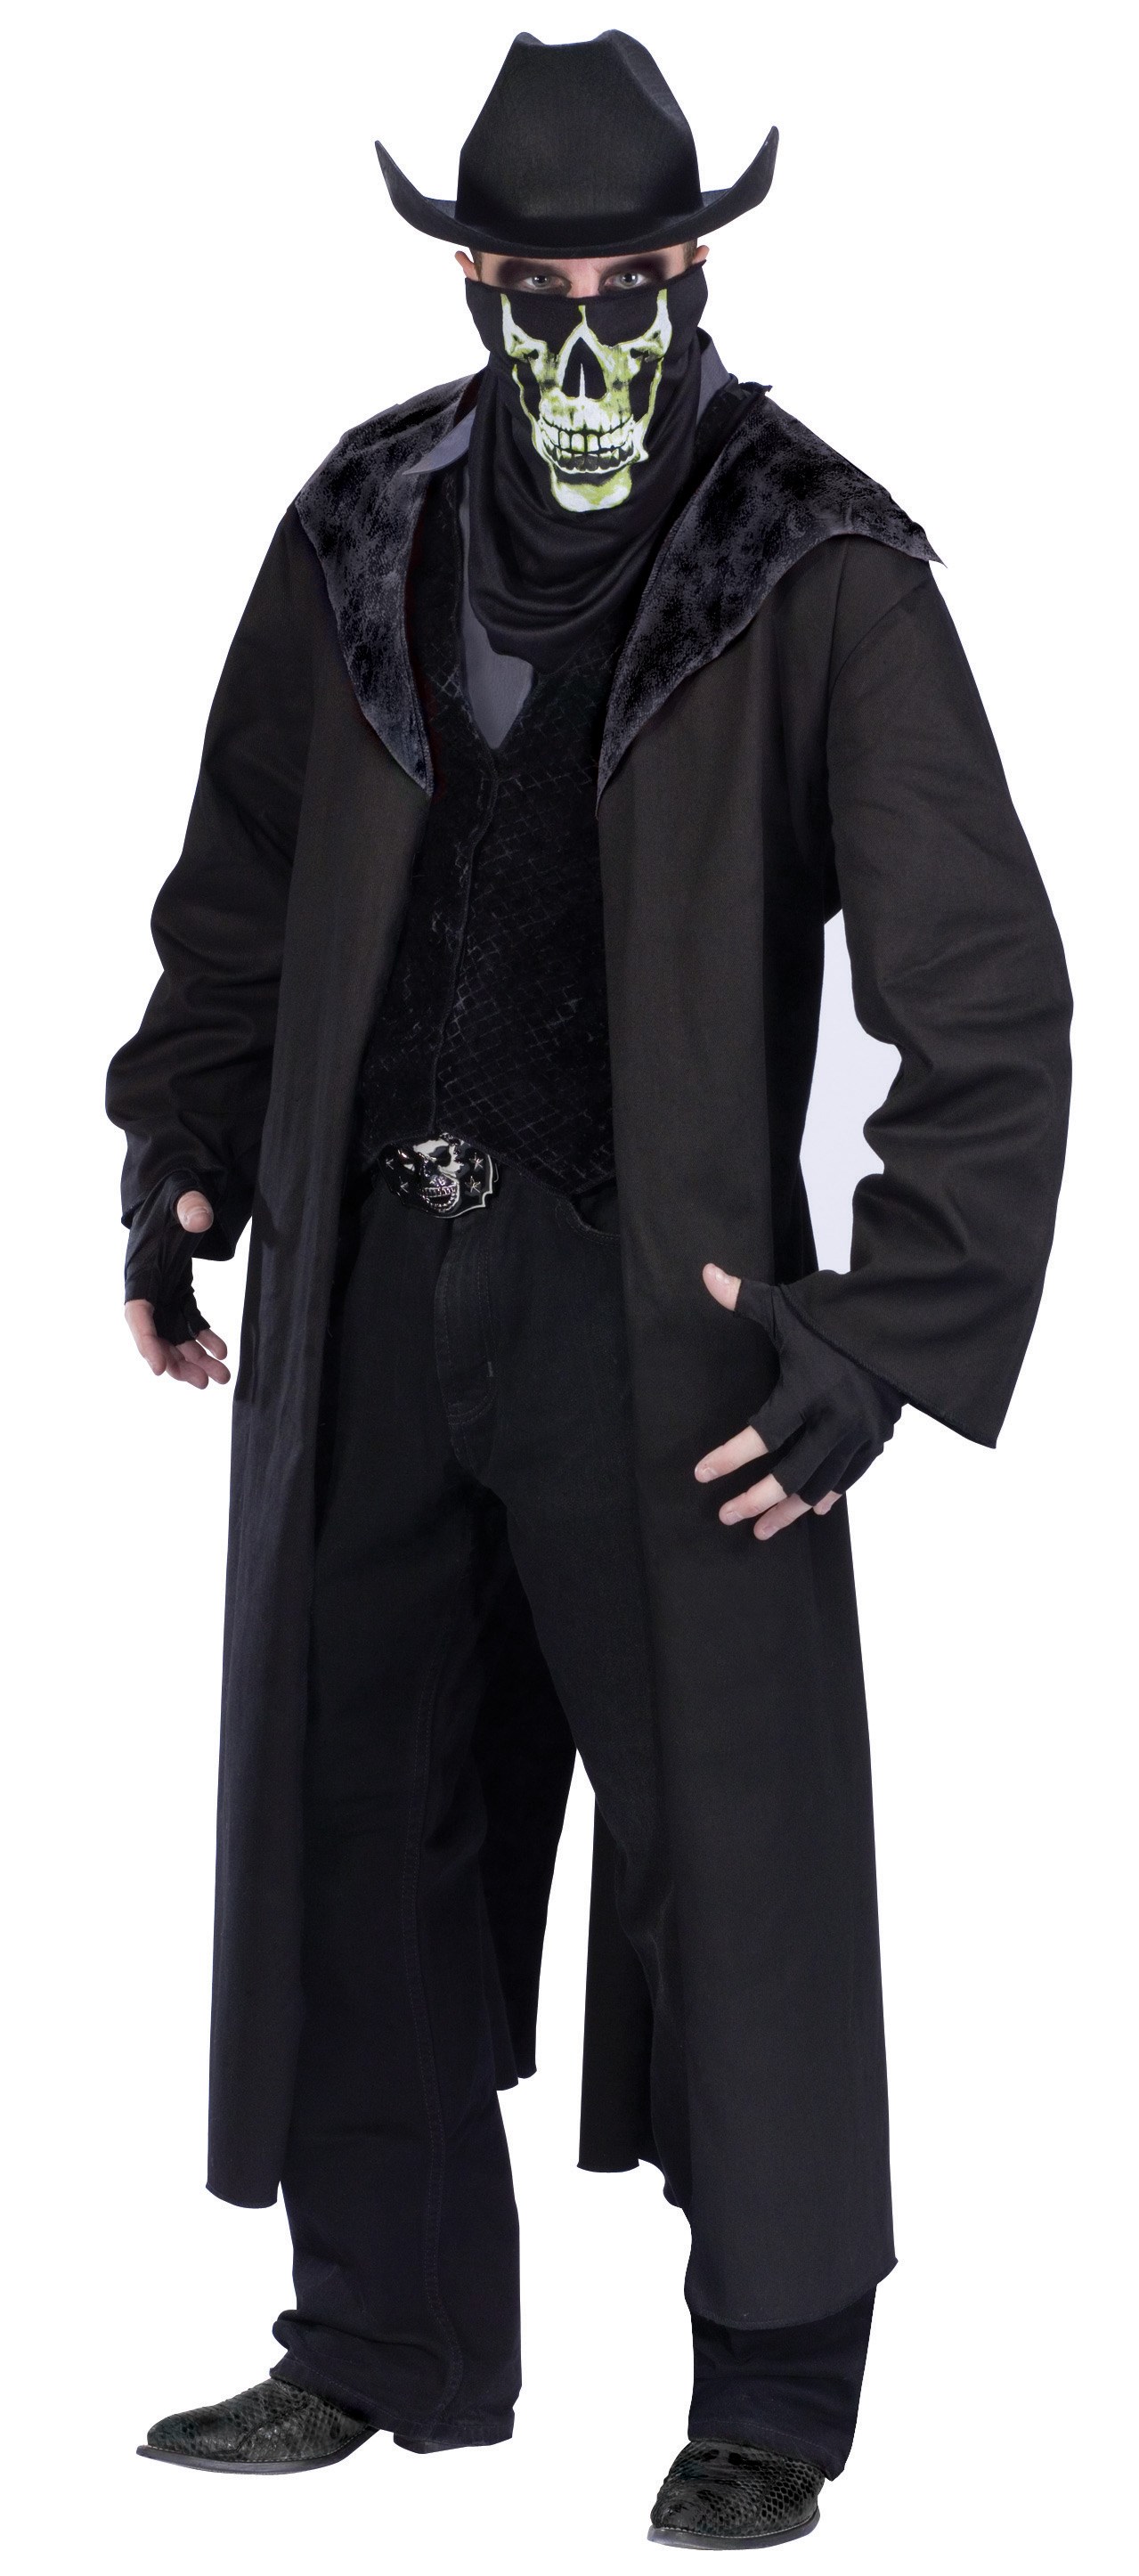 Evil Outlaw Adult Costume